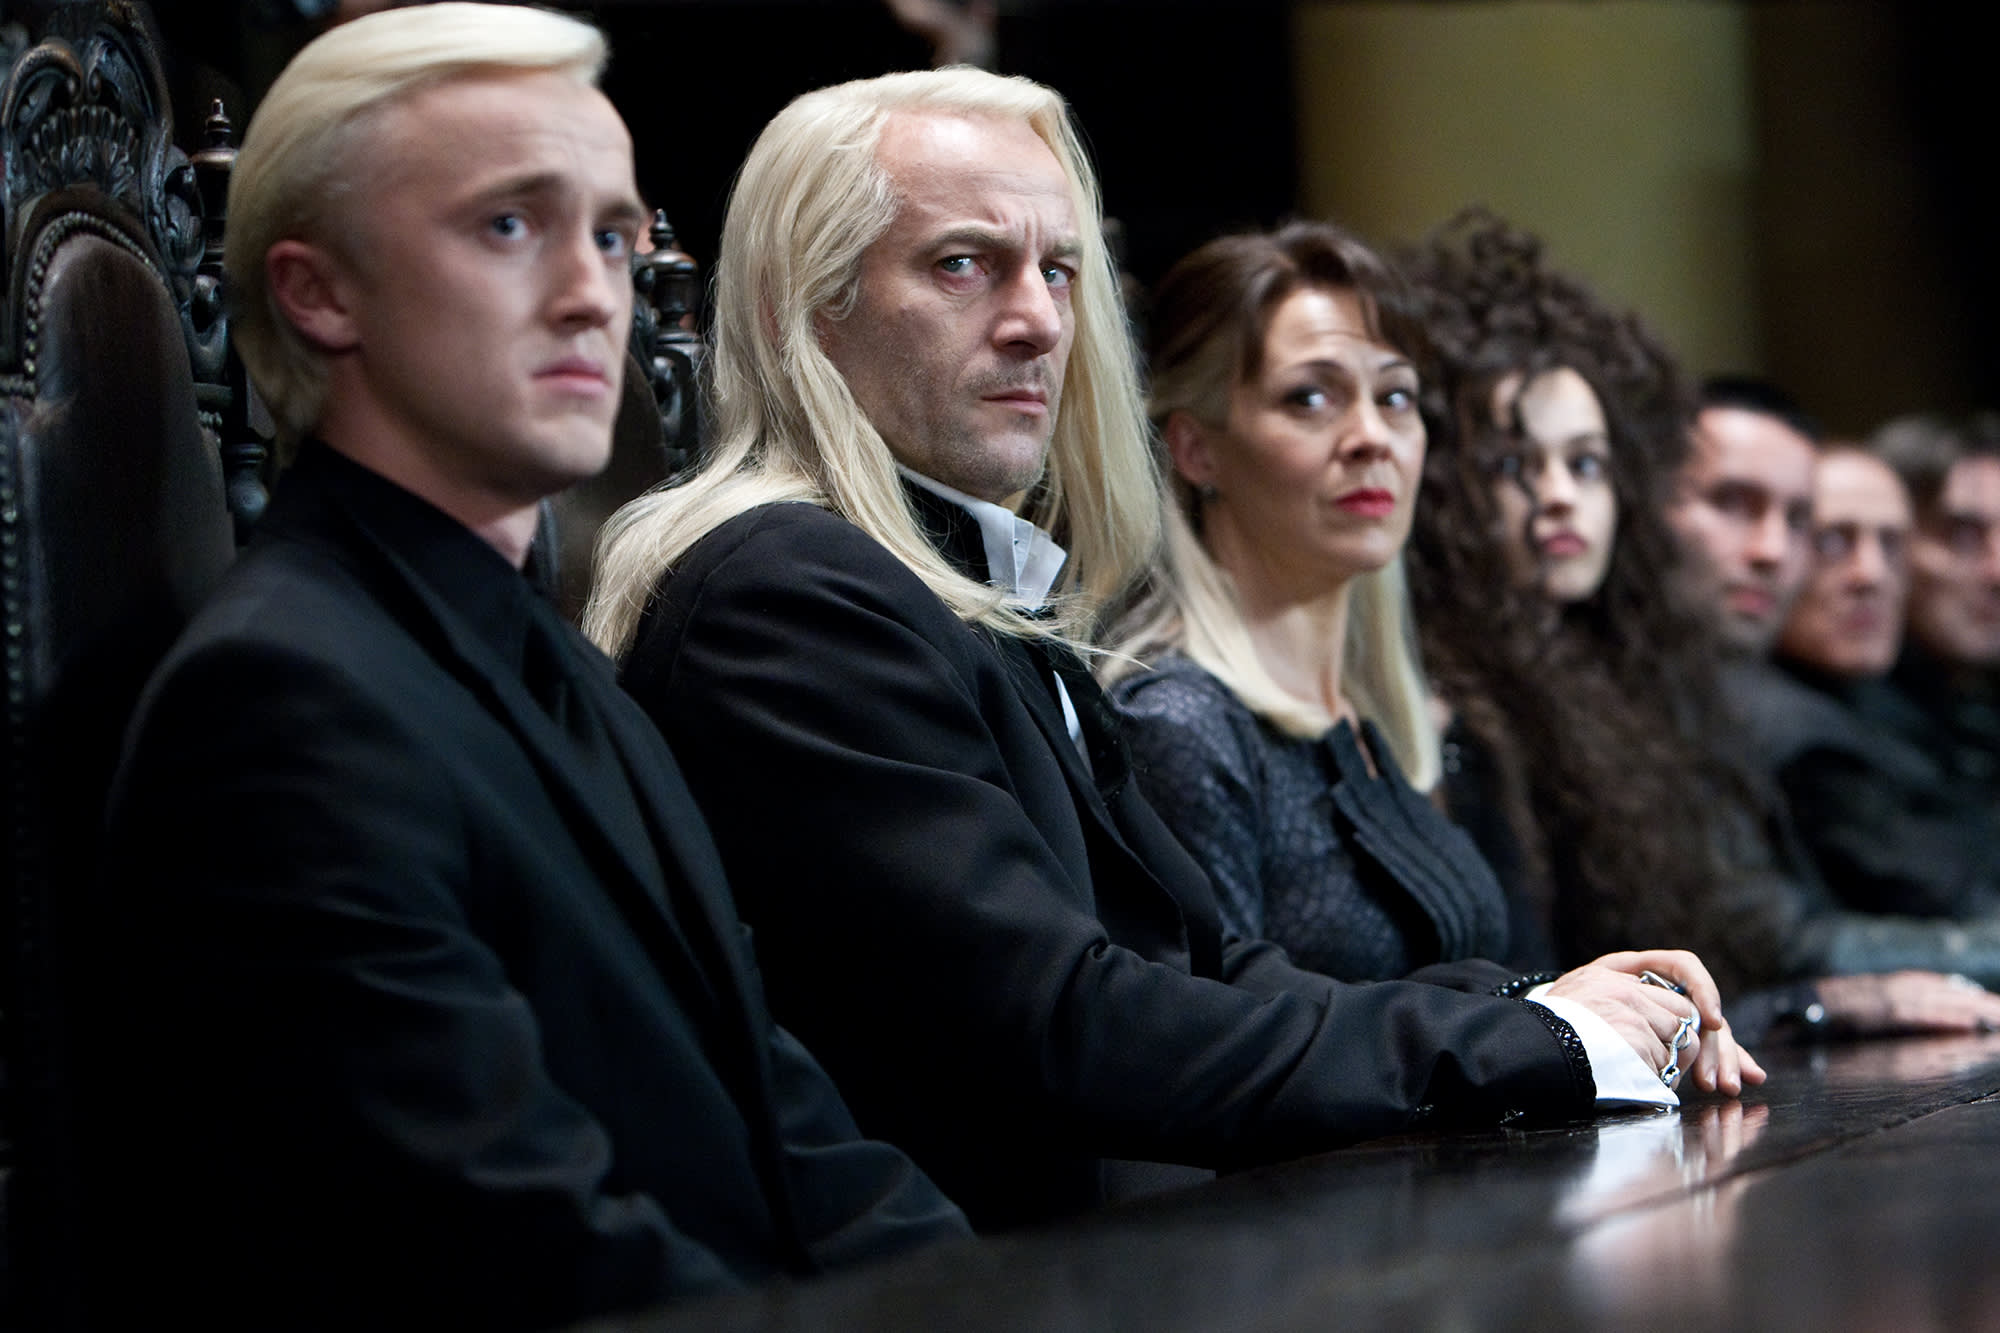 HP-F7-deathly-hallows-part-one-lucius-draco-narcissa-sitting-at-table-malfoy-manor-web-landscape